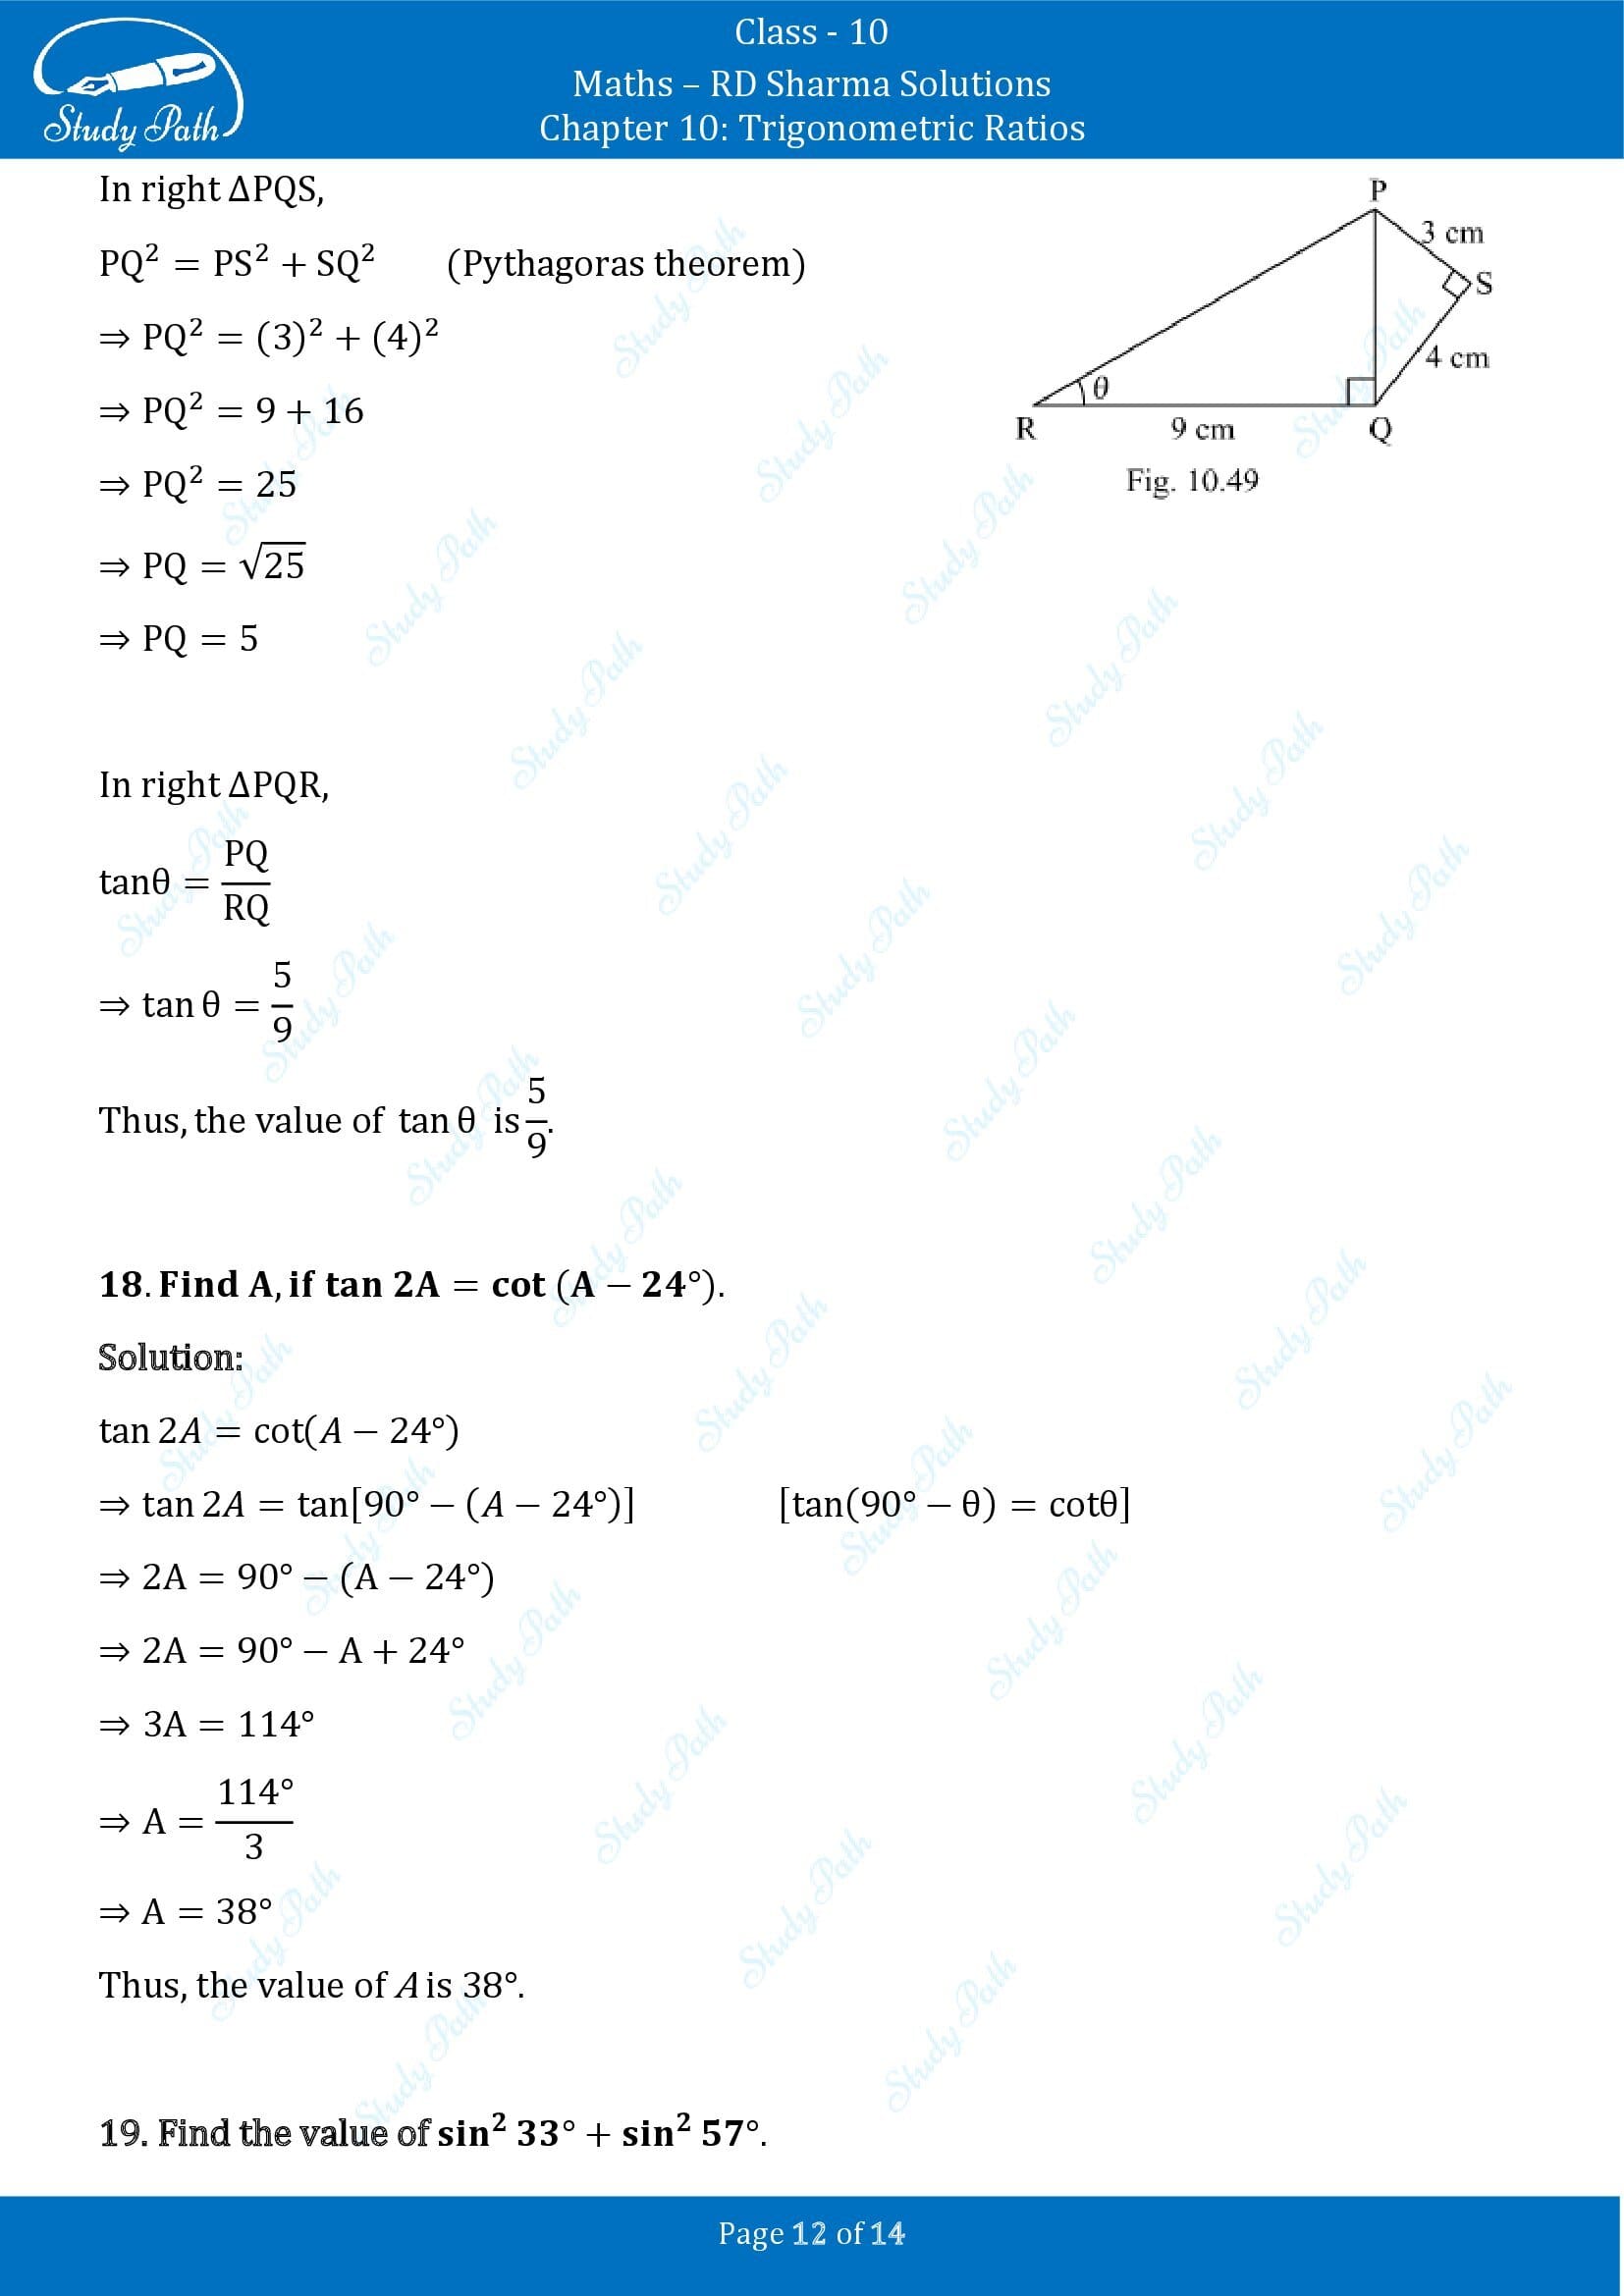 RD Sharma Solutions Class 10 Chapter 10 Trigonometric Ratios Very Short Answer Type Questions VSAQs 00012